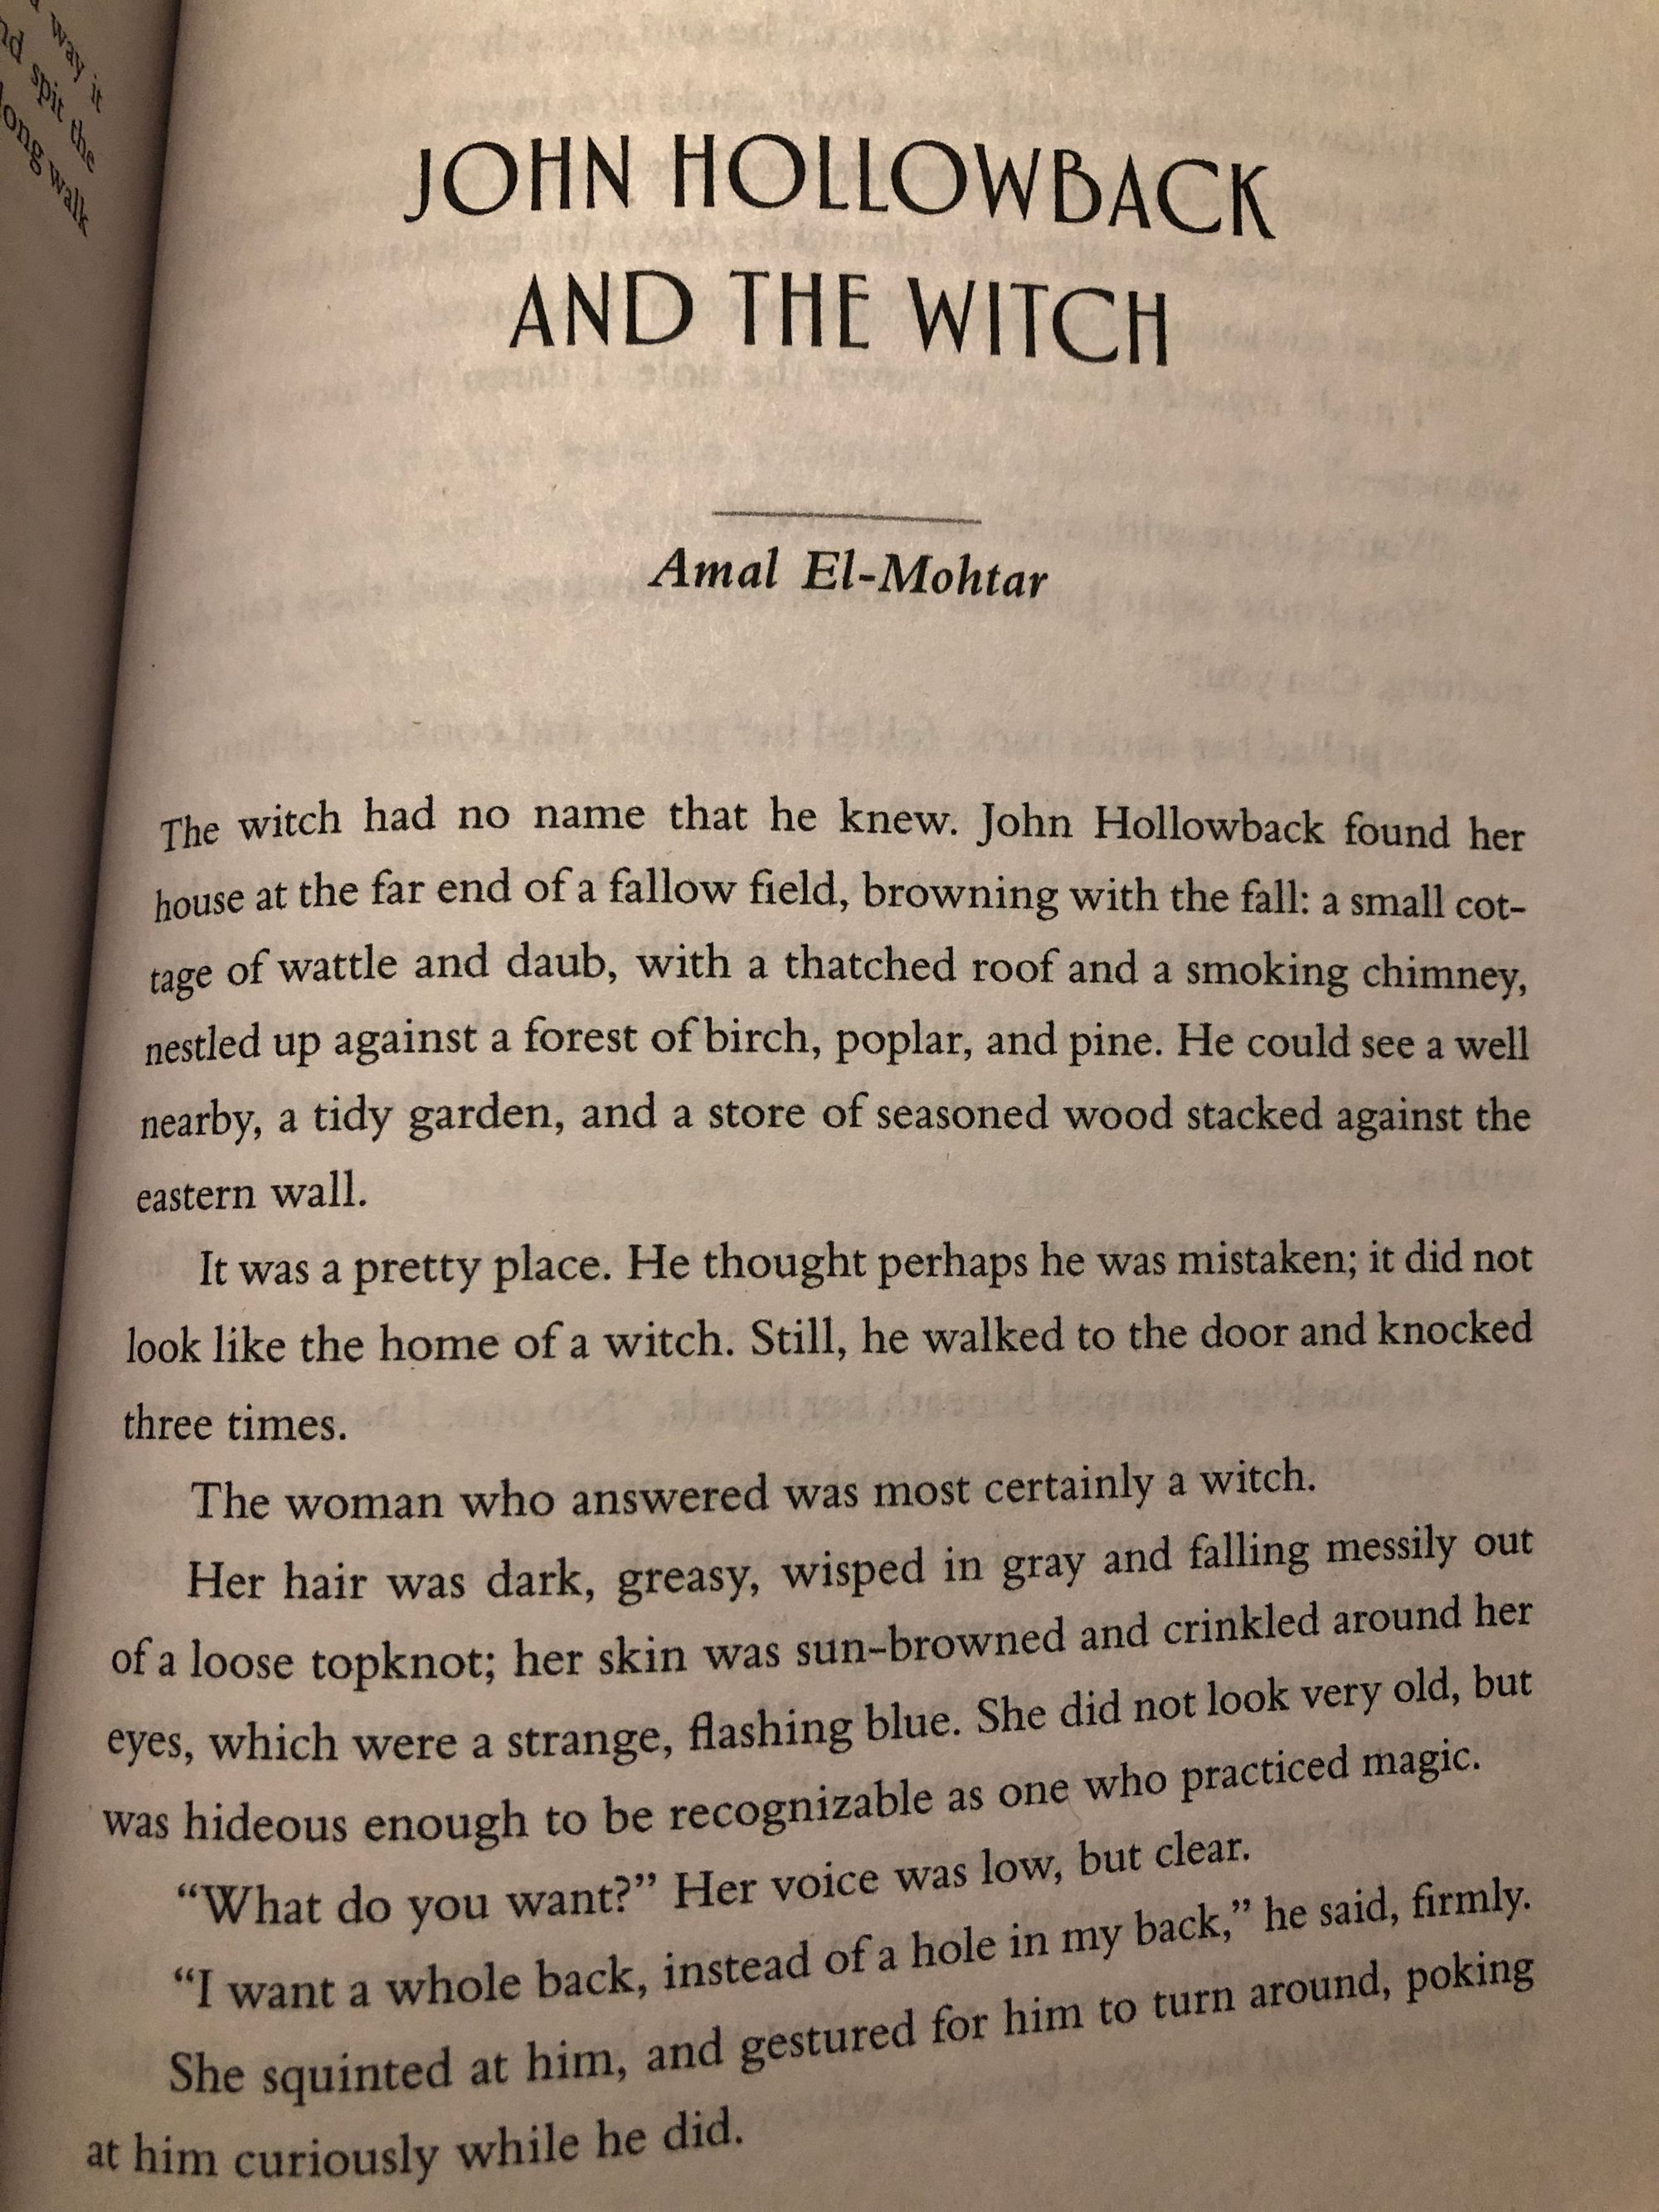 First page of my story. It reads as follows: The witch had no name that he knew. John Hollowback found her house at the far end of a fallow field, browning with the fall: a small cottage of wattle and daub, with a thatched roof and a smoking chimney, nestled up against a forest of birch, poplar, and pine. He could see a well nearby, a tidy garden, and a store of seasoned wood stacked against the eastern wall. It was a pretty place. He thought perhaps he was mistaken; it did not look like the home of a witch. Still, he walked to the door and knocked three times. The woman who answered was most certainly a witch. Her hair was dark, greasy, wisped in grey and falling messily out of a loose top knot; her skin was sun-browned and crinkled around her eyes, which were a strange, flashing blue. She did not look very old, but was hideous enough to be recognisable as one who practiced magic. “What do you want?” Her voice was low, but clear. “I want a whole back, instead of a hole in my back,” he said, firmly. She squinted at him, and gestured for him to turn around, poking at him curiously while he did.